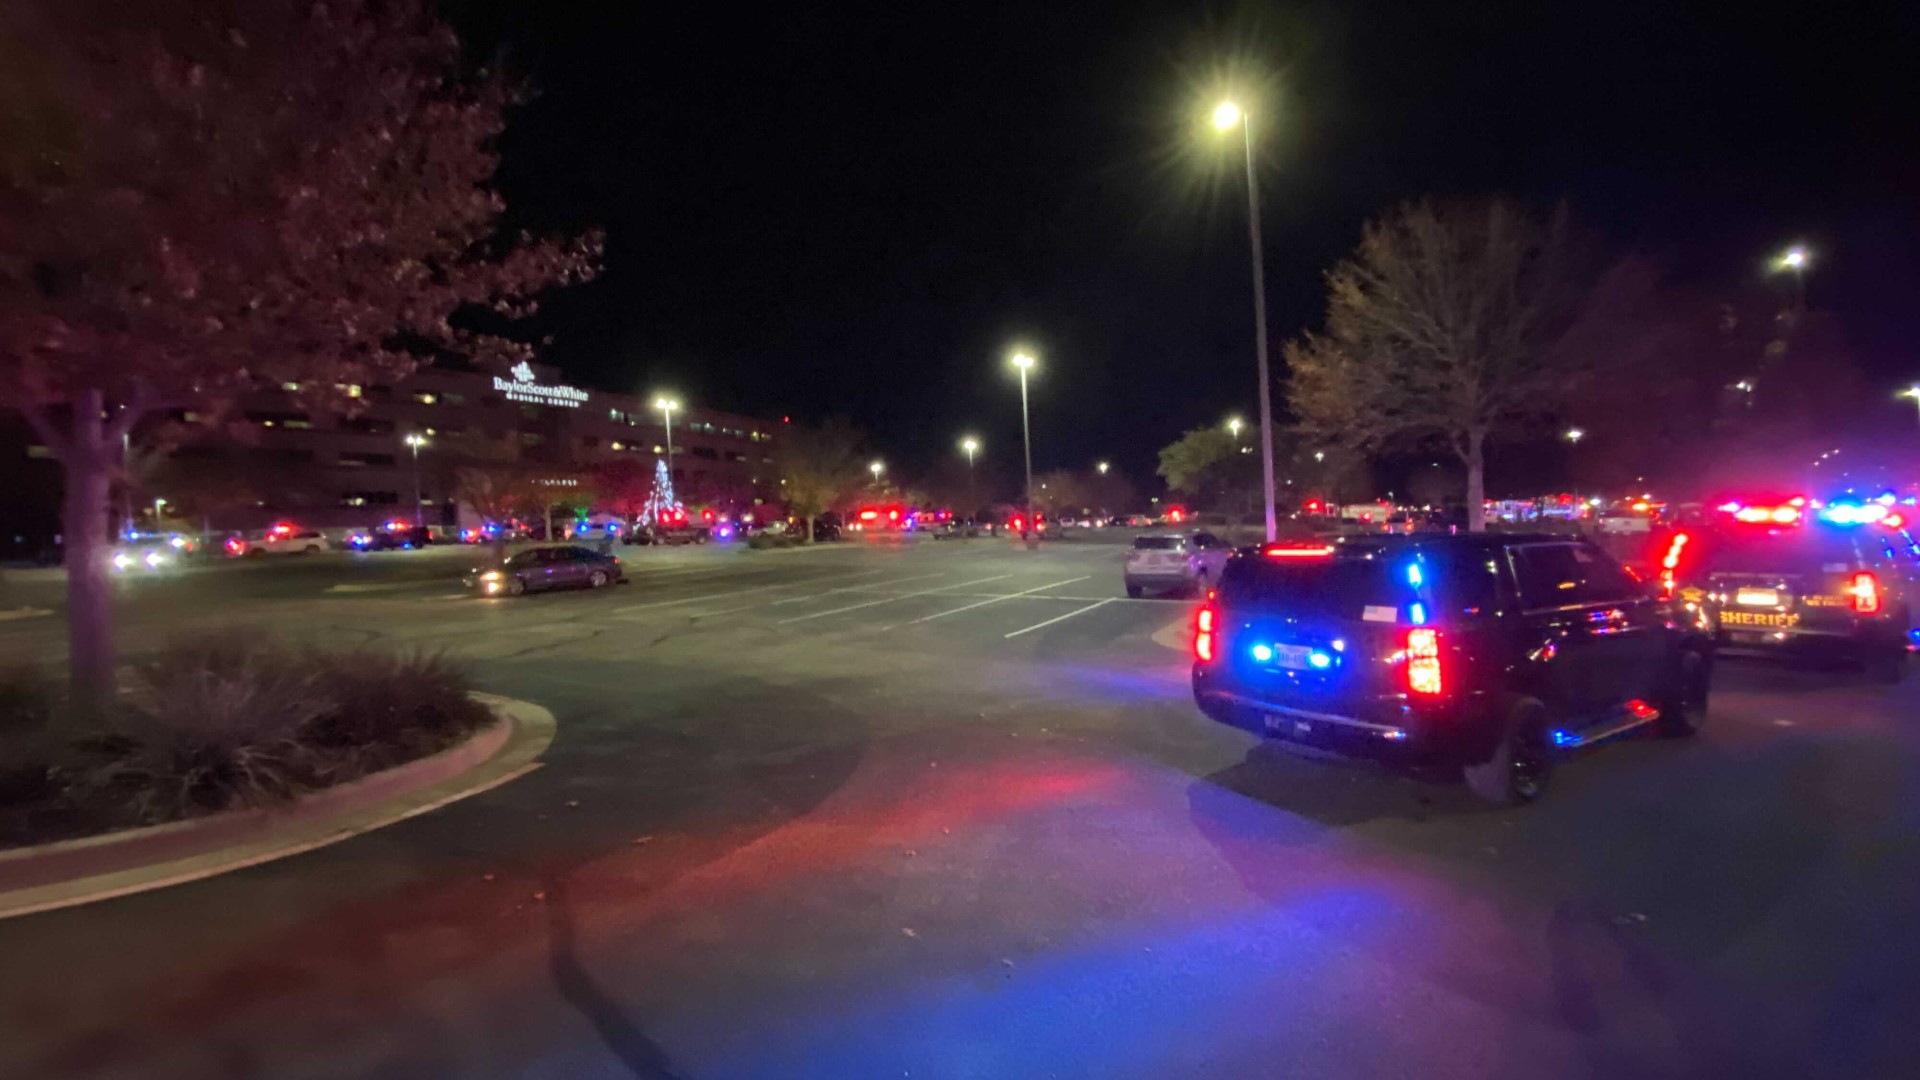 Roughly 100 First Responder vehicles from different agencies visited Hillcrest and Providence hospitals to shine their lights for encouragement Wednesday evening.